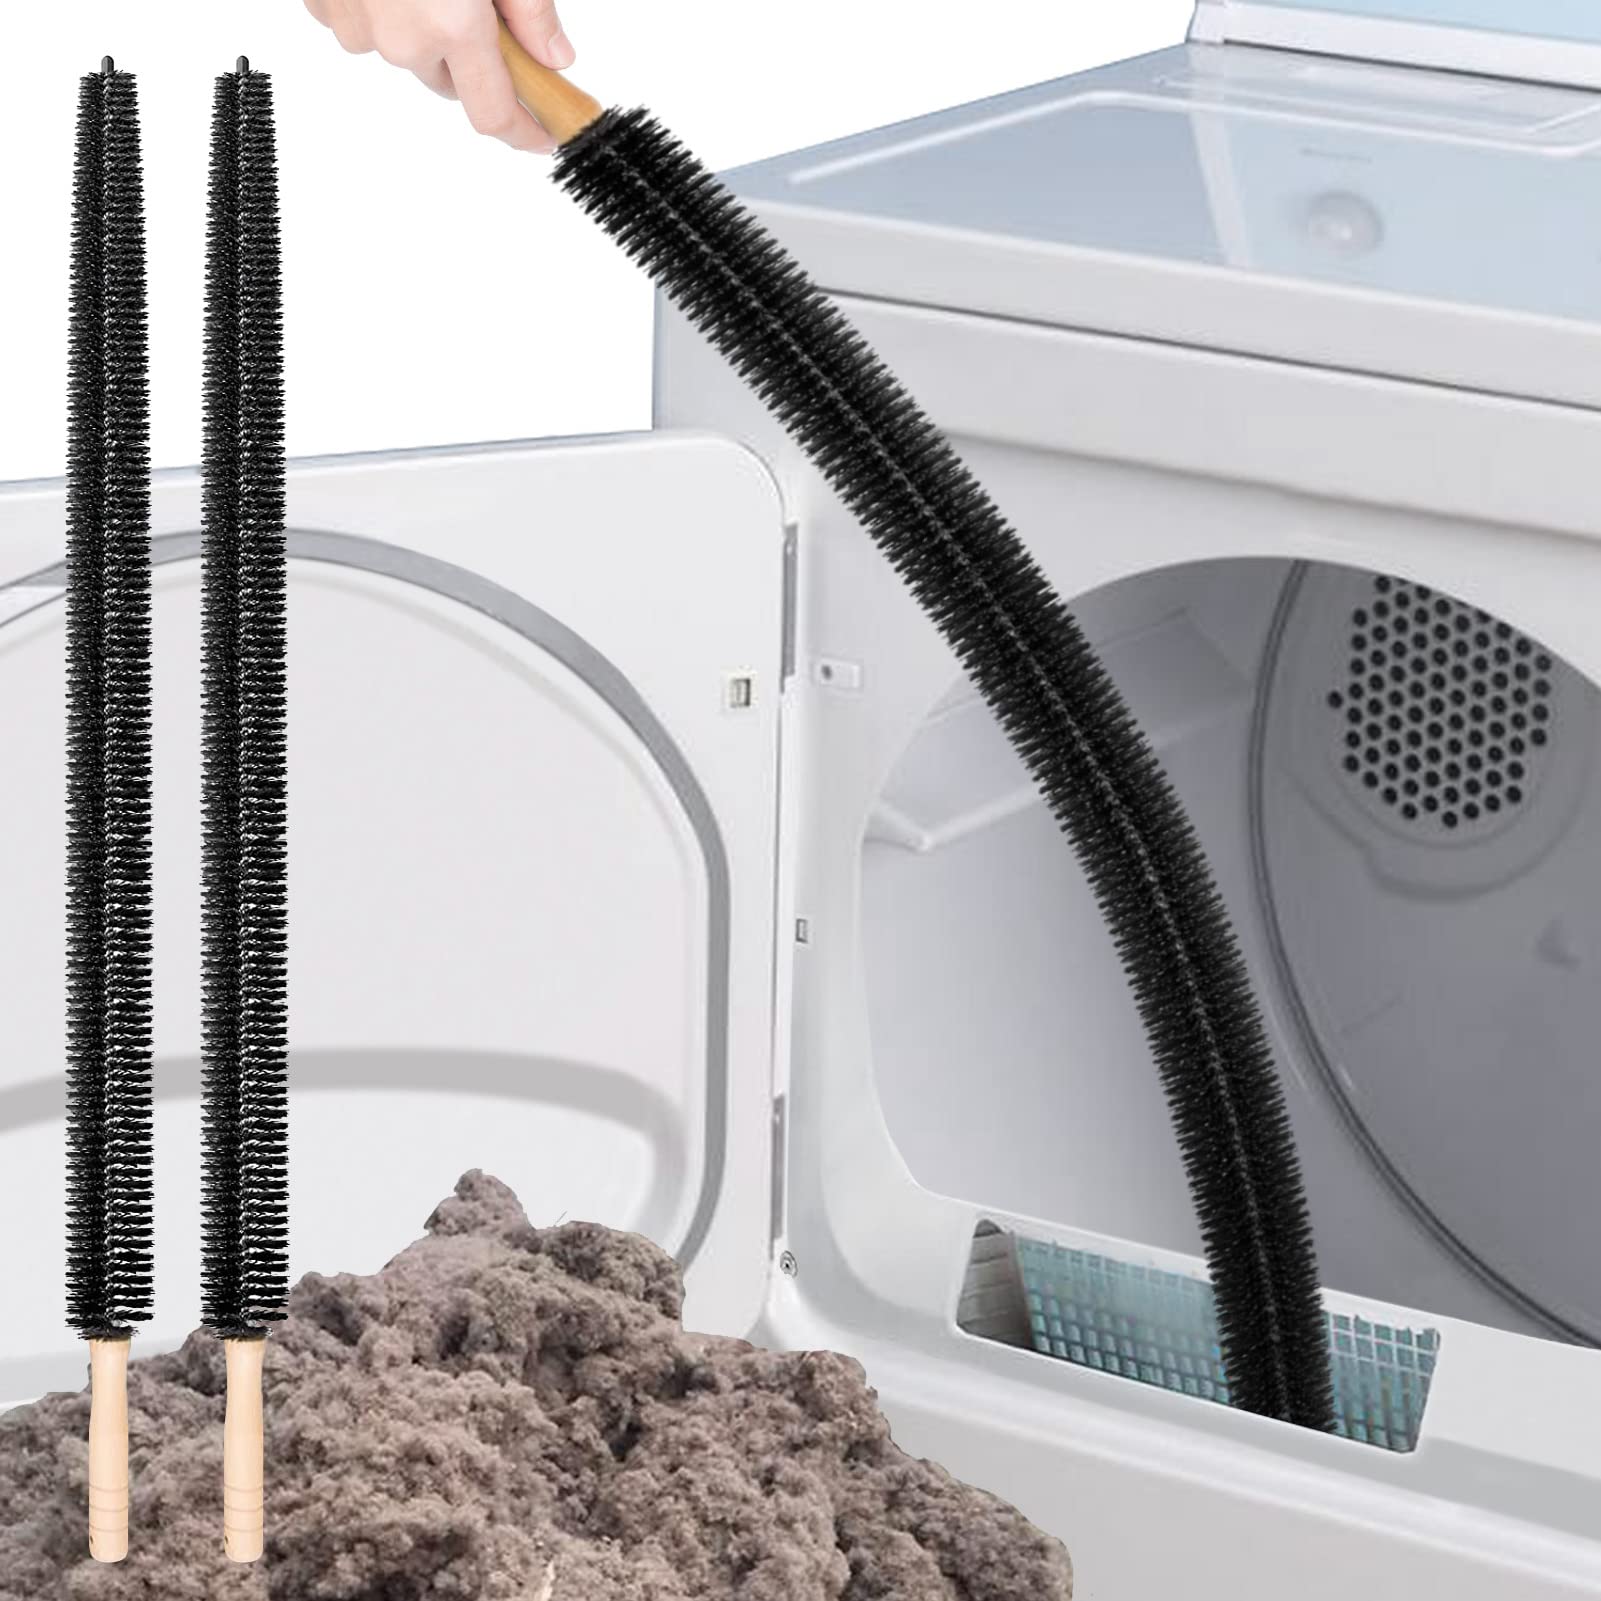 Holikme 30 Ft Dryer Vent Cleaner Kit,Flexible Lint Brush with Drill  Attachment, Extends Up to 30 Ft for Easy Cleaning, Synthetic Brush Head,  Use with or Without a Power Drill 